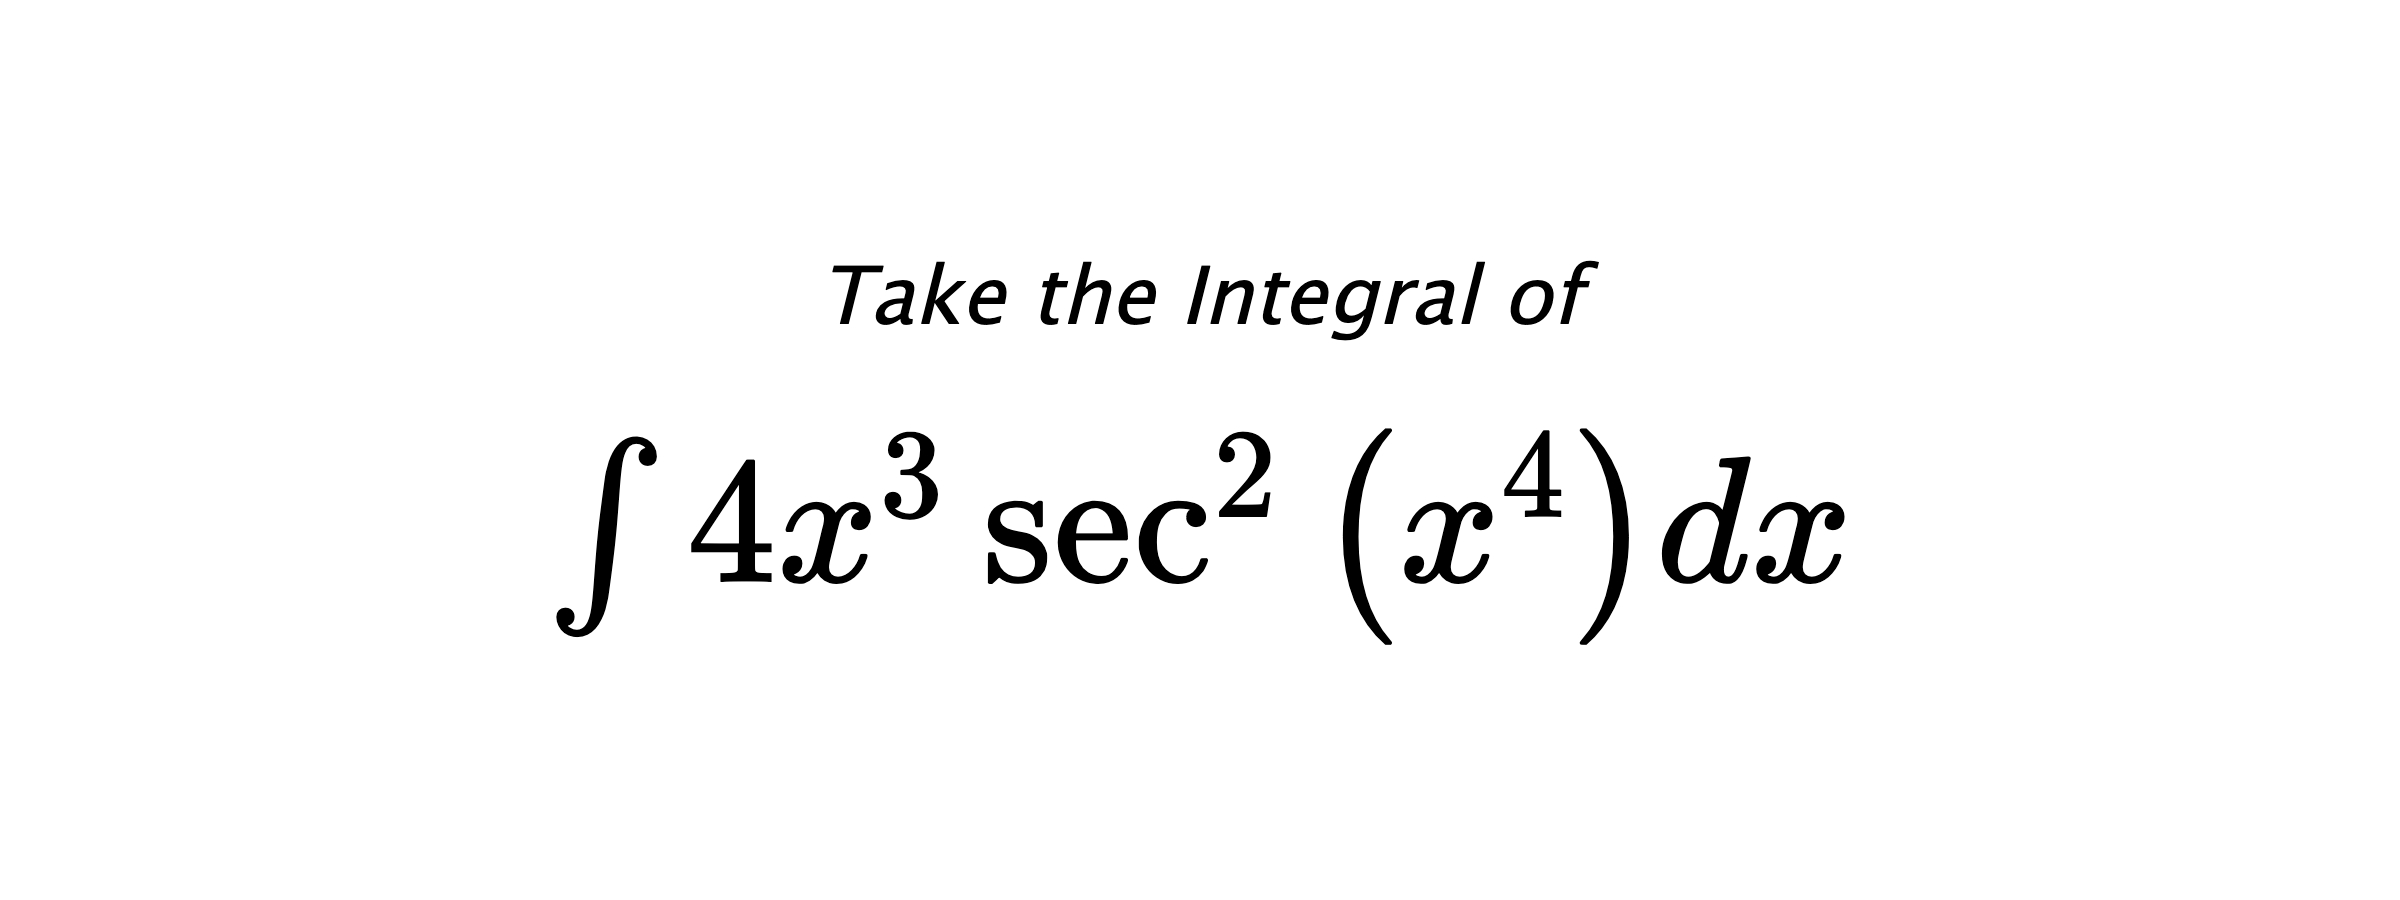 Take the Integral of $ \int 4 x^{3} \sec^{2}{\left(x^{4} \right)} dx $